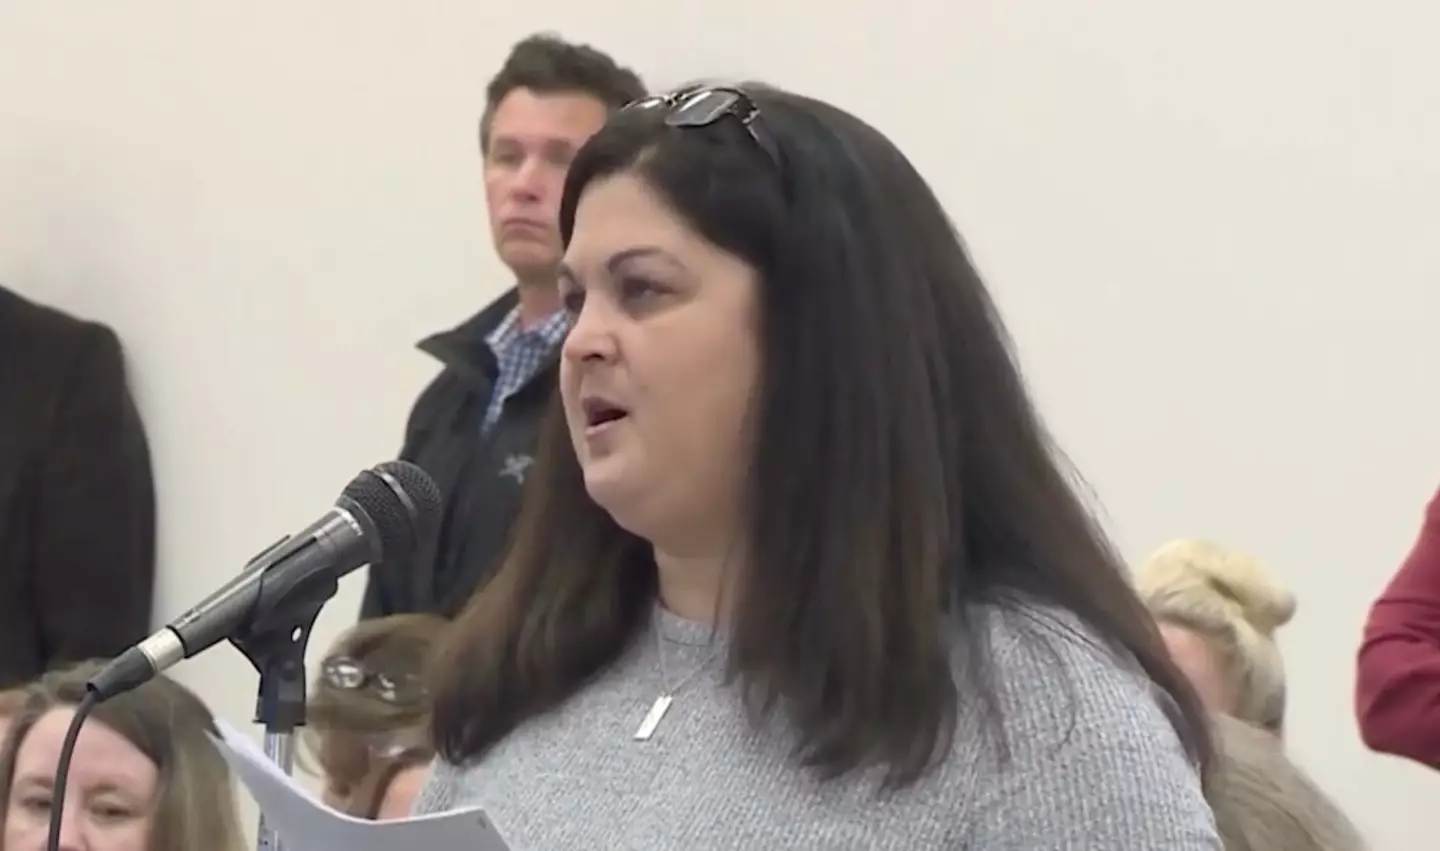 Deanne Corbin was among the parents calling on the education board to remove the student.